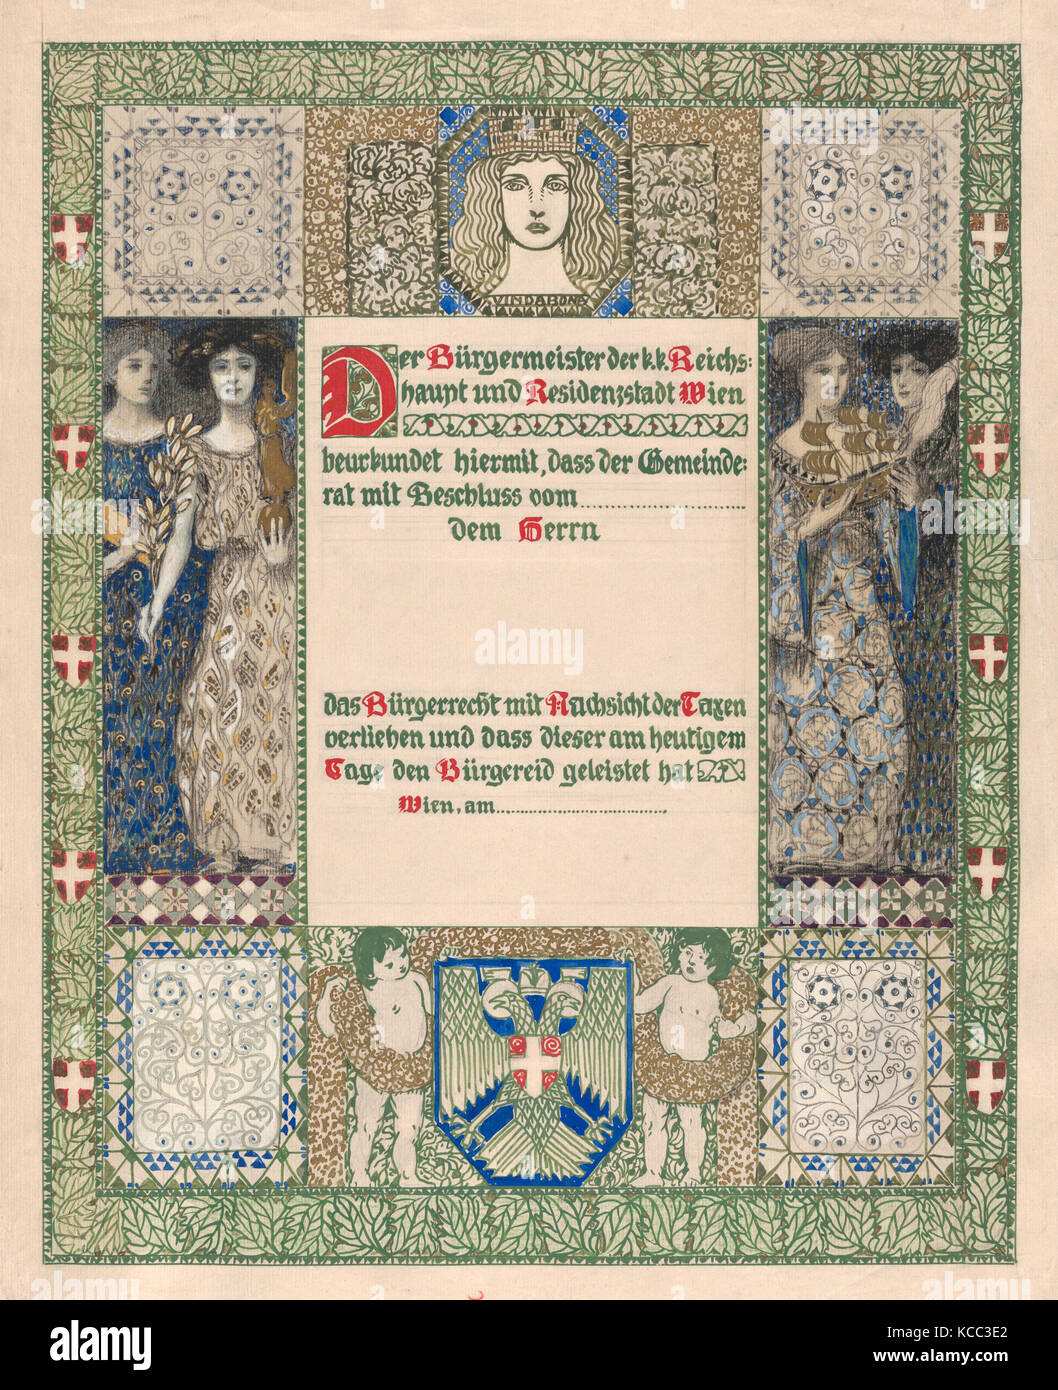 Drawings and Prints, Drawing, Design for a certificate of citizenship, awarded by the city of Vienna, Artist, Erwin Puchinger Stock Photo